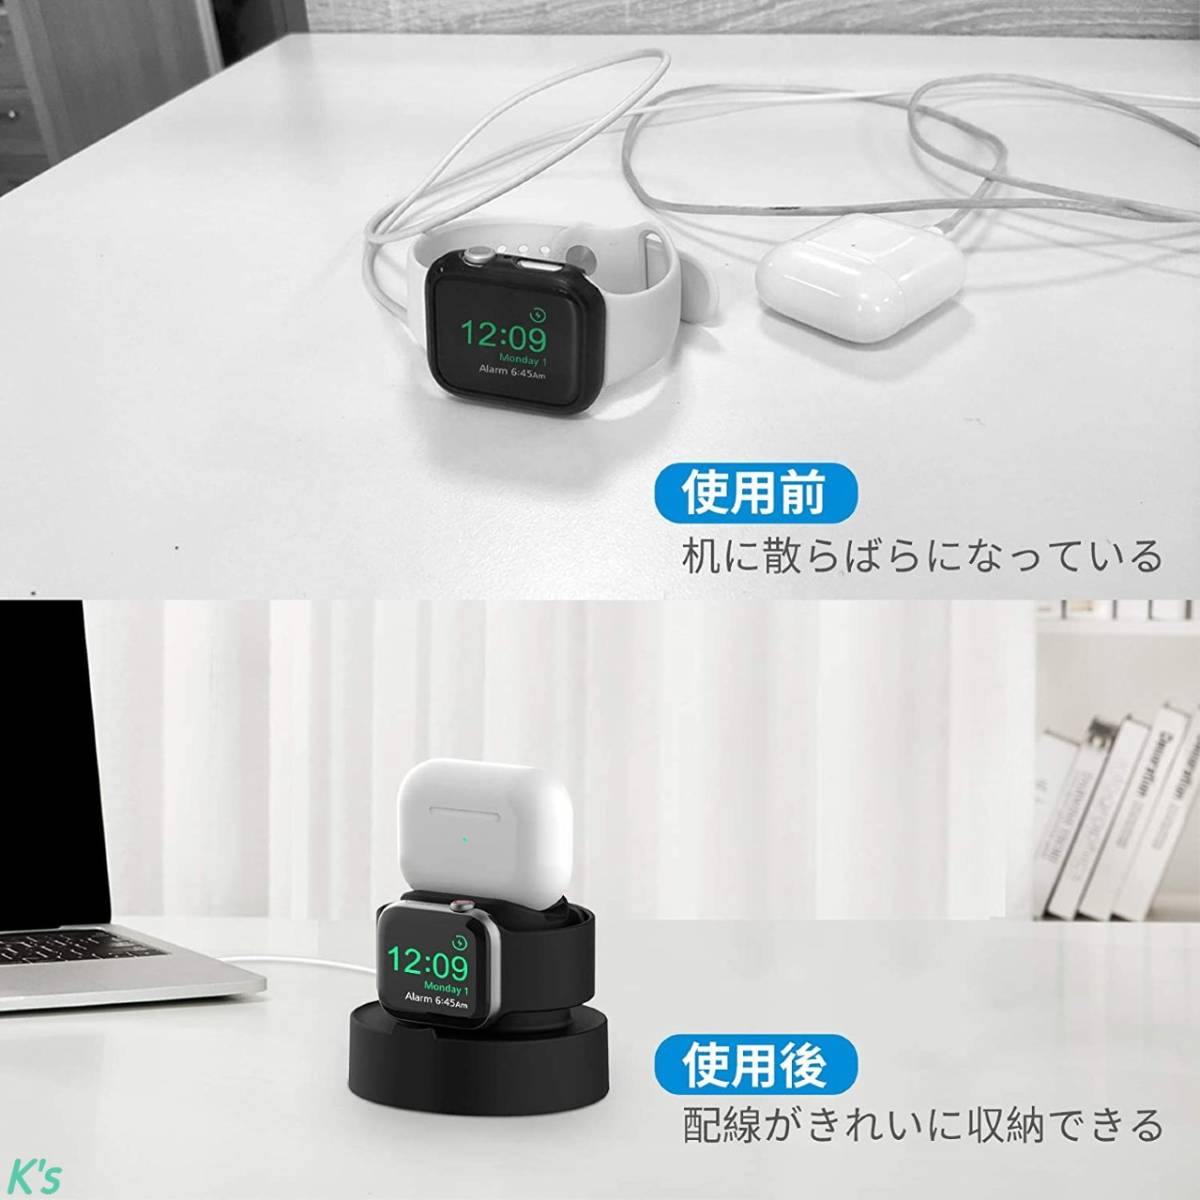  black 1 pcs 2 position Apple Watch AirPods all sorts correspondence multifunction Stand Up ru watch air poz pen sill wireless charger charge stand 